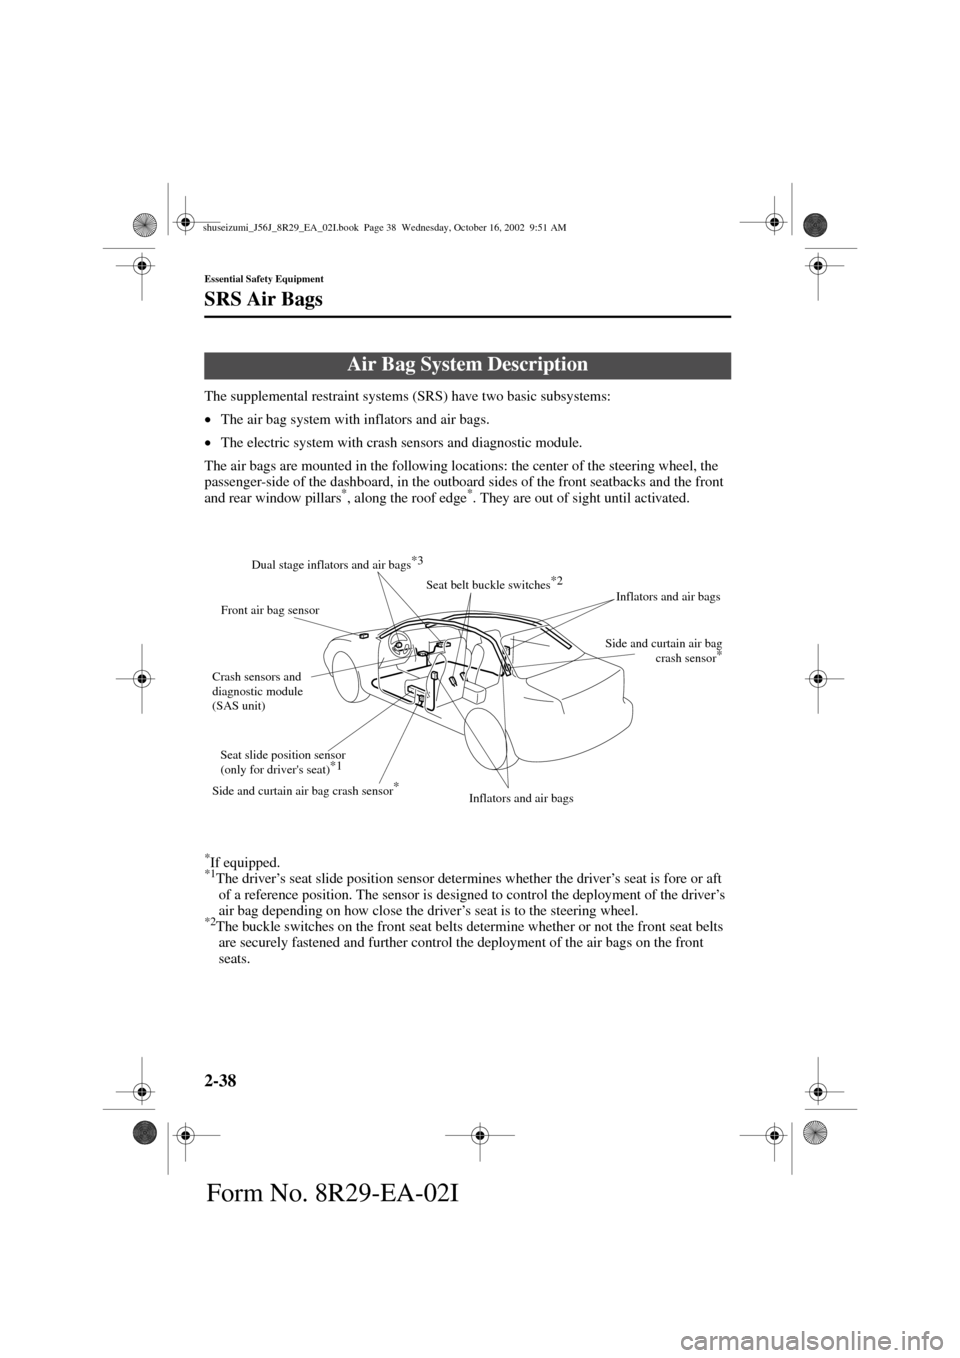 MAZDA MODEL 6 2003   (in English) Service Manual 2-38
Essential Safety Equipment
SRS Air Bags
Form No. 8R29-EA-02I
The supplemental restraint systems (SRS) have two basic subsystems:
•
The air bag system with inflators and air bags.
•
The electr